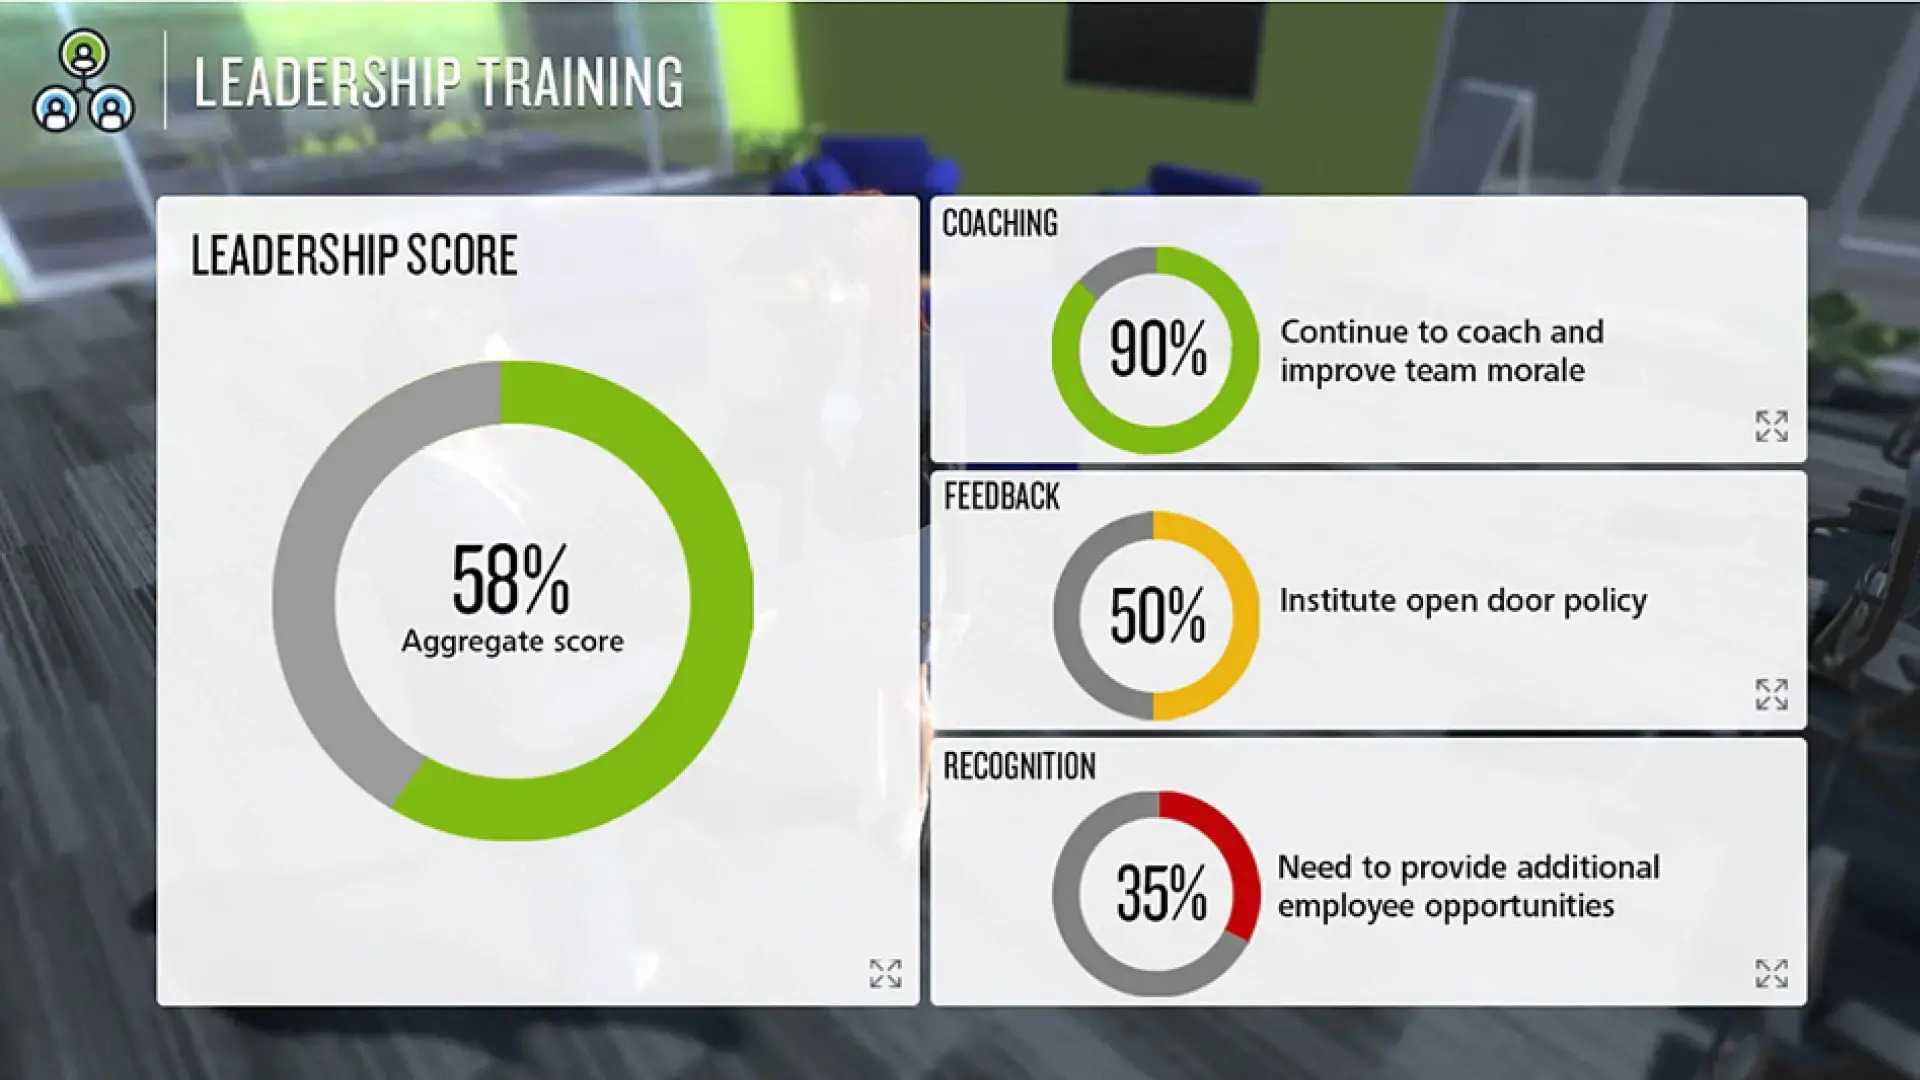 Deloitte's gamified curriculum for leadership training dashboard.